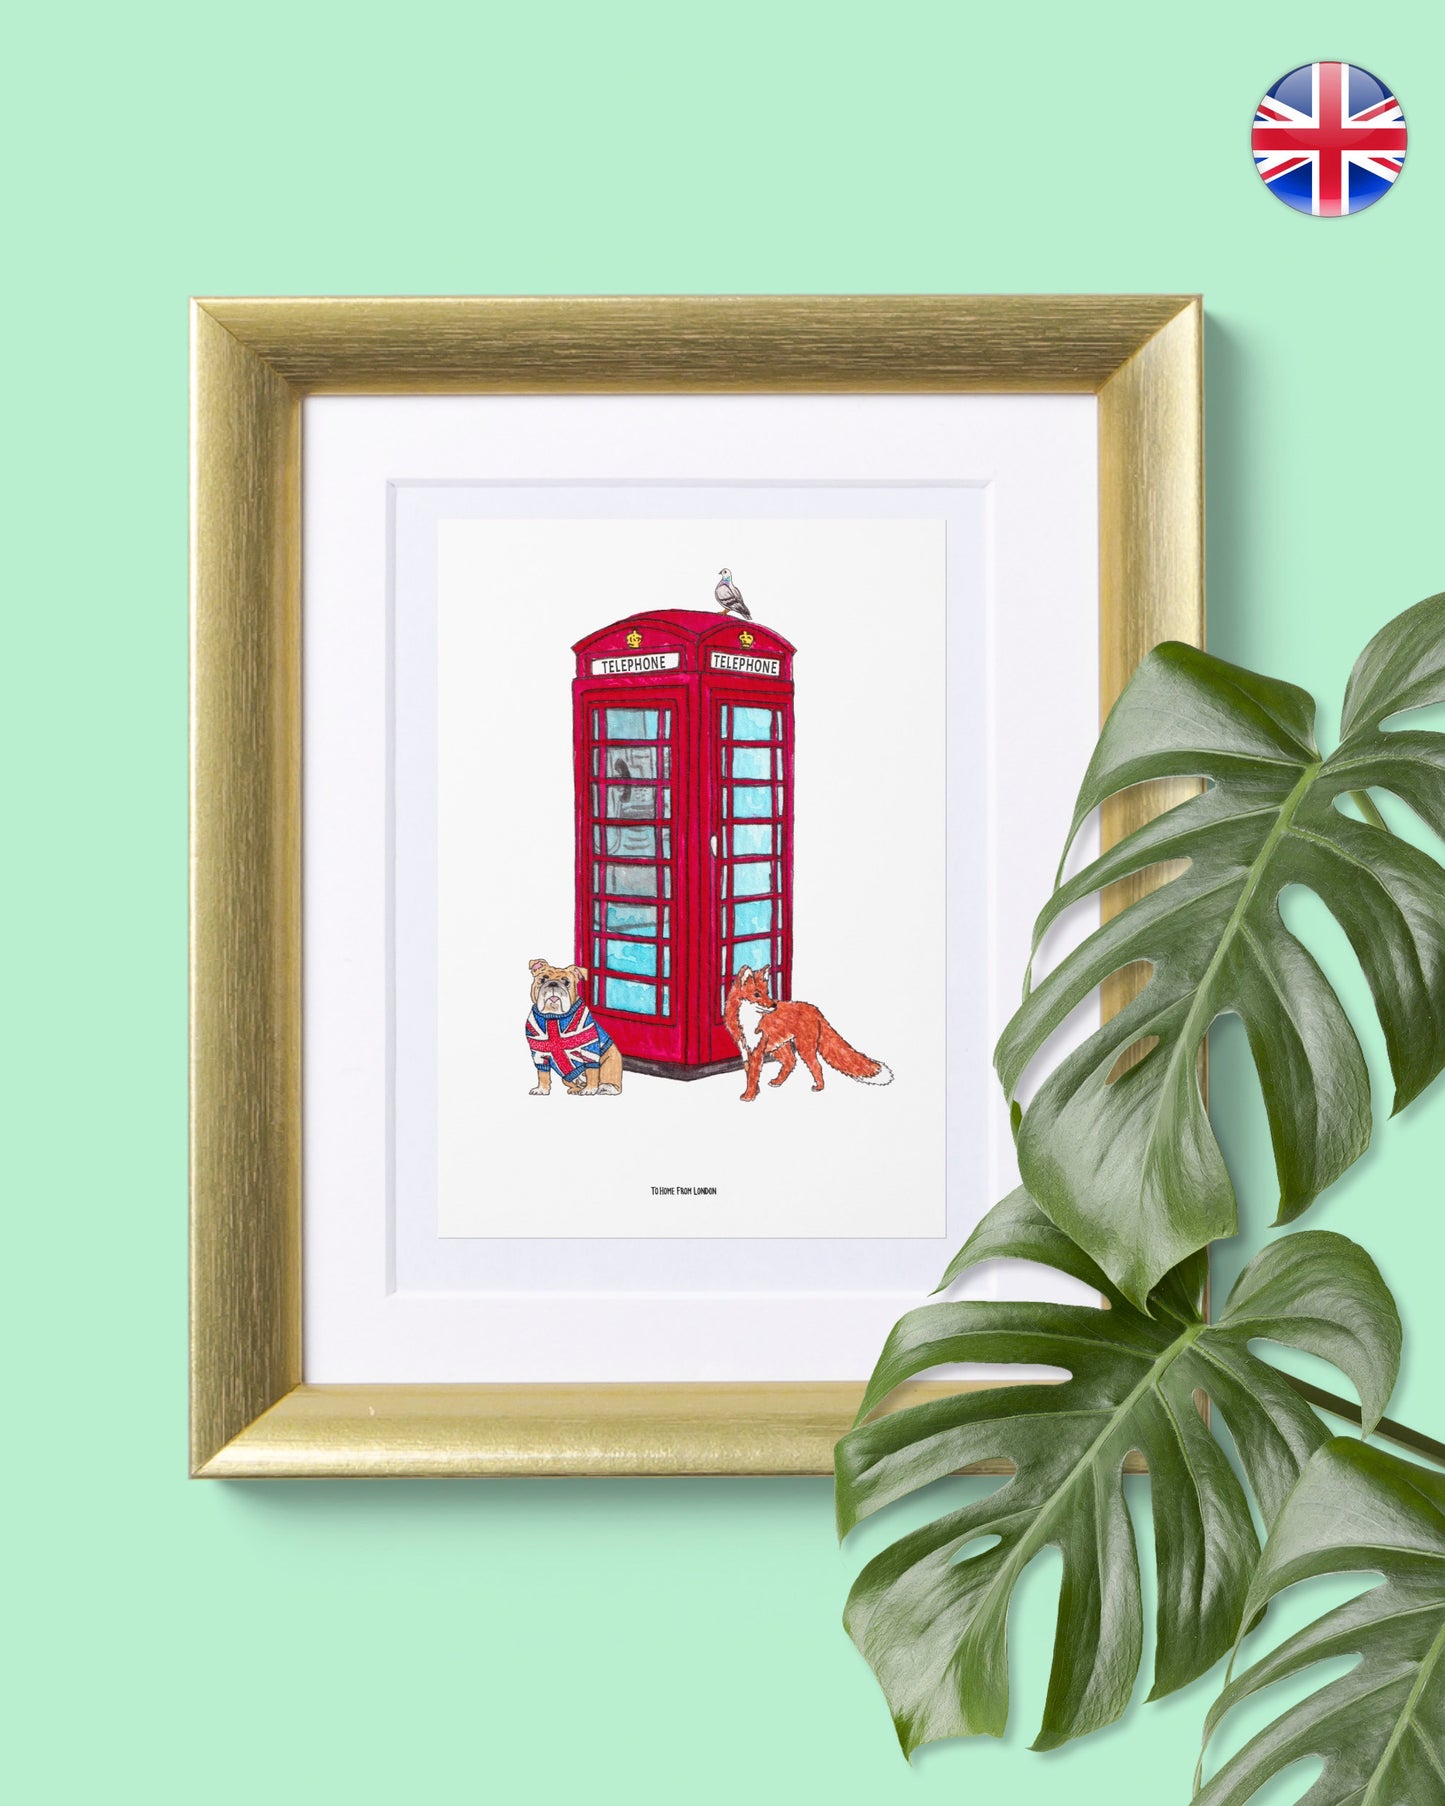 London Icons Art Prints - To Home From London